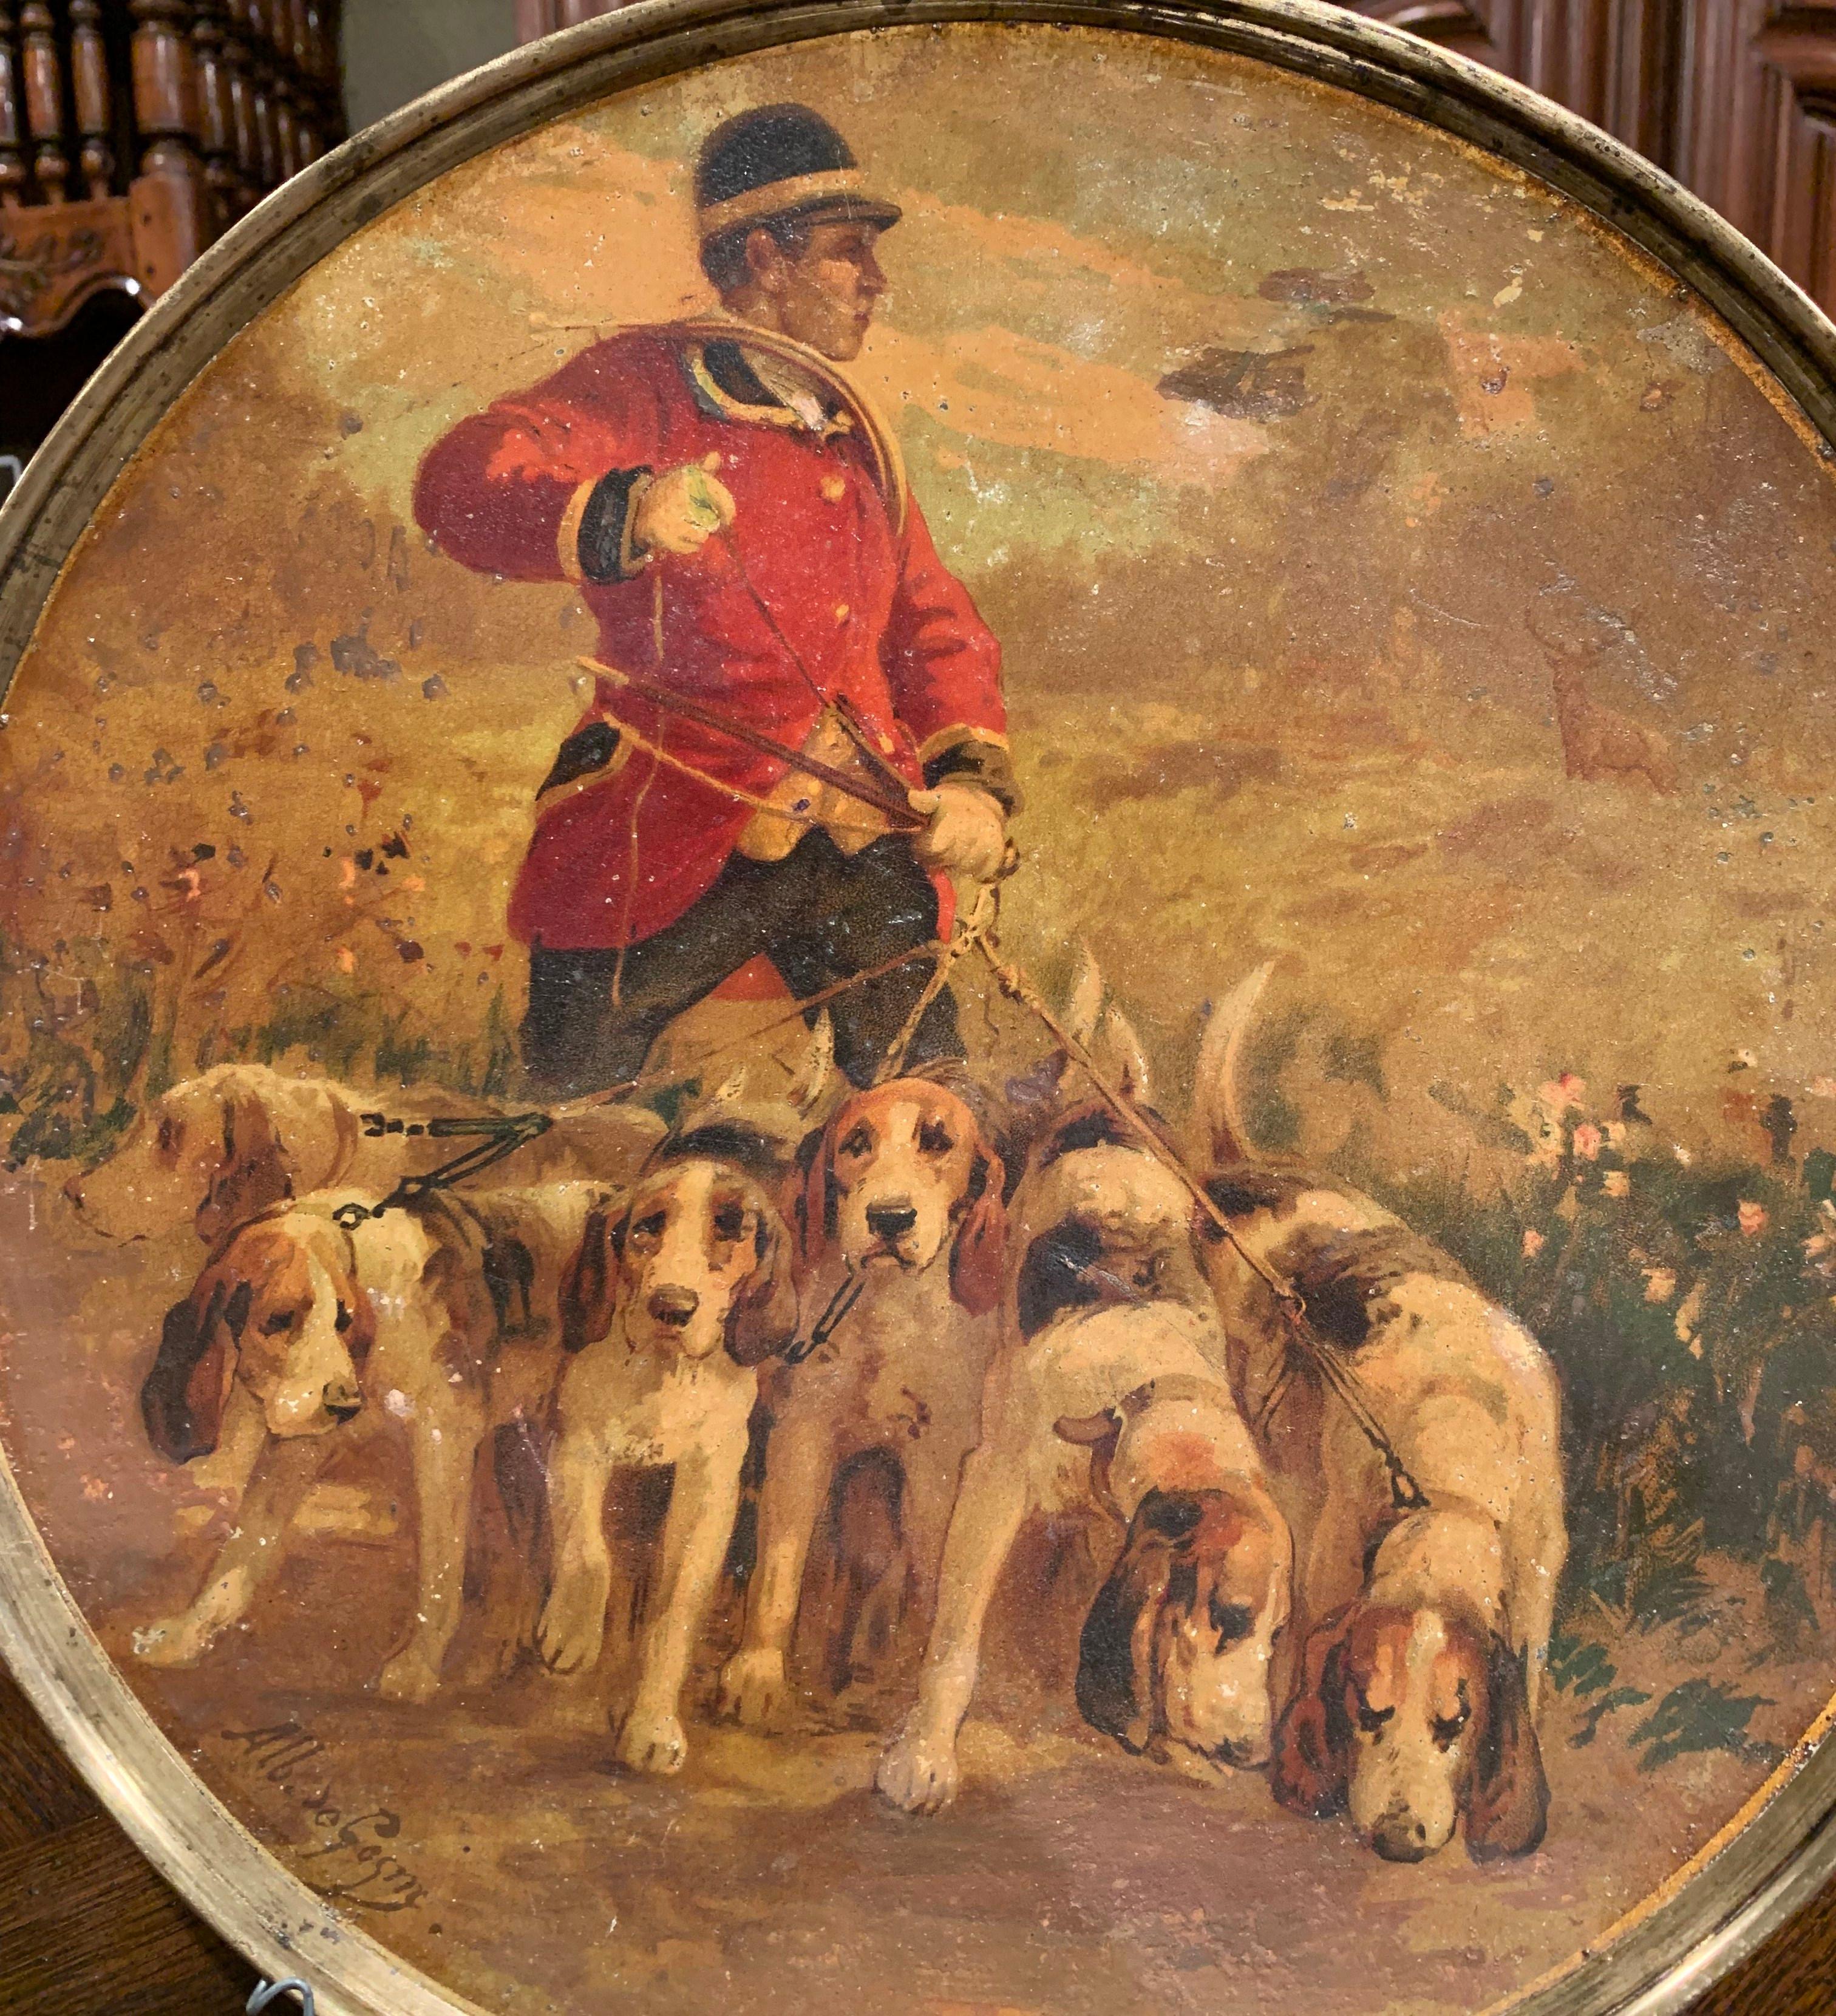 Brass 19th Century French Painted Hunt Scene Tole Wall Plates Signed A. de Gesne, Pair For Sale